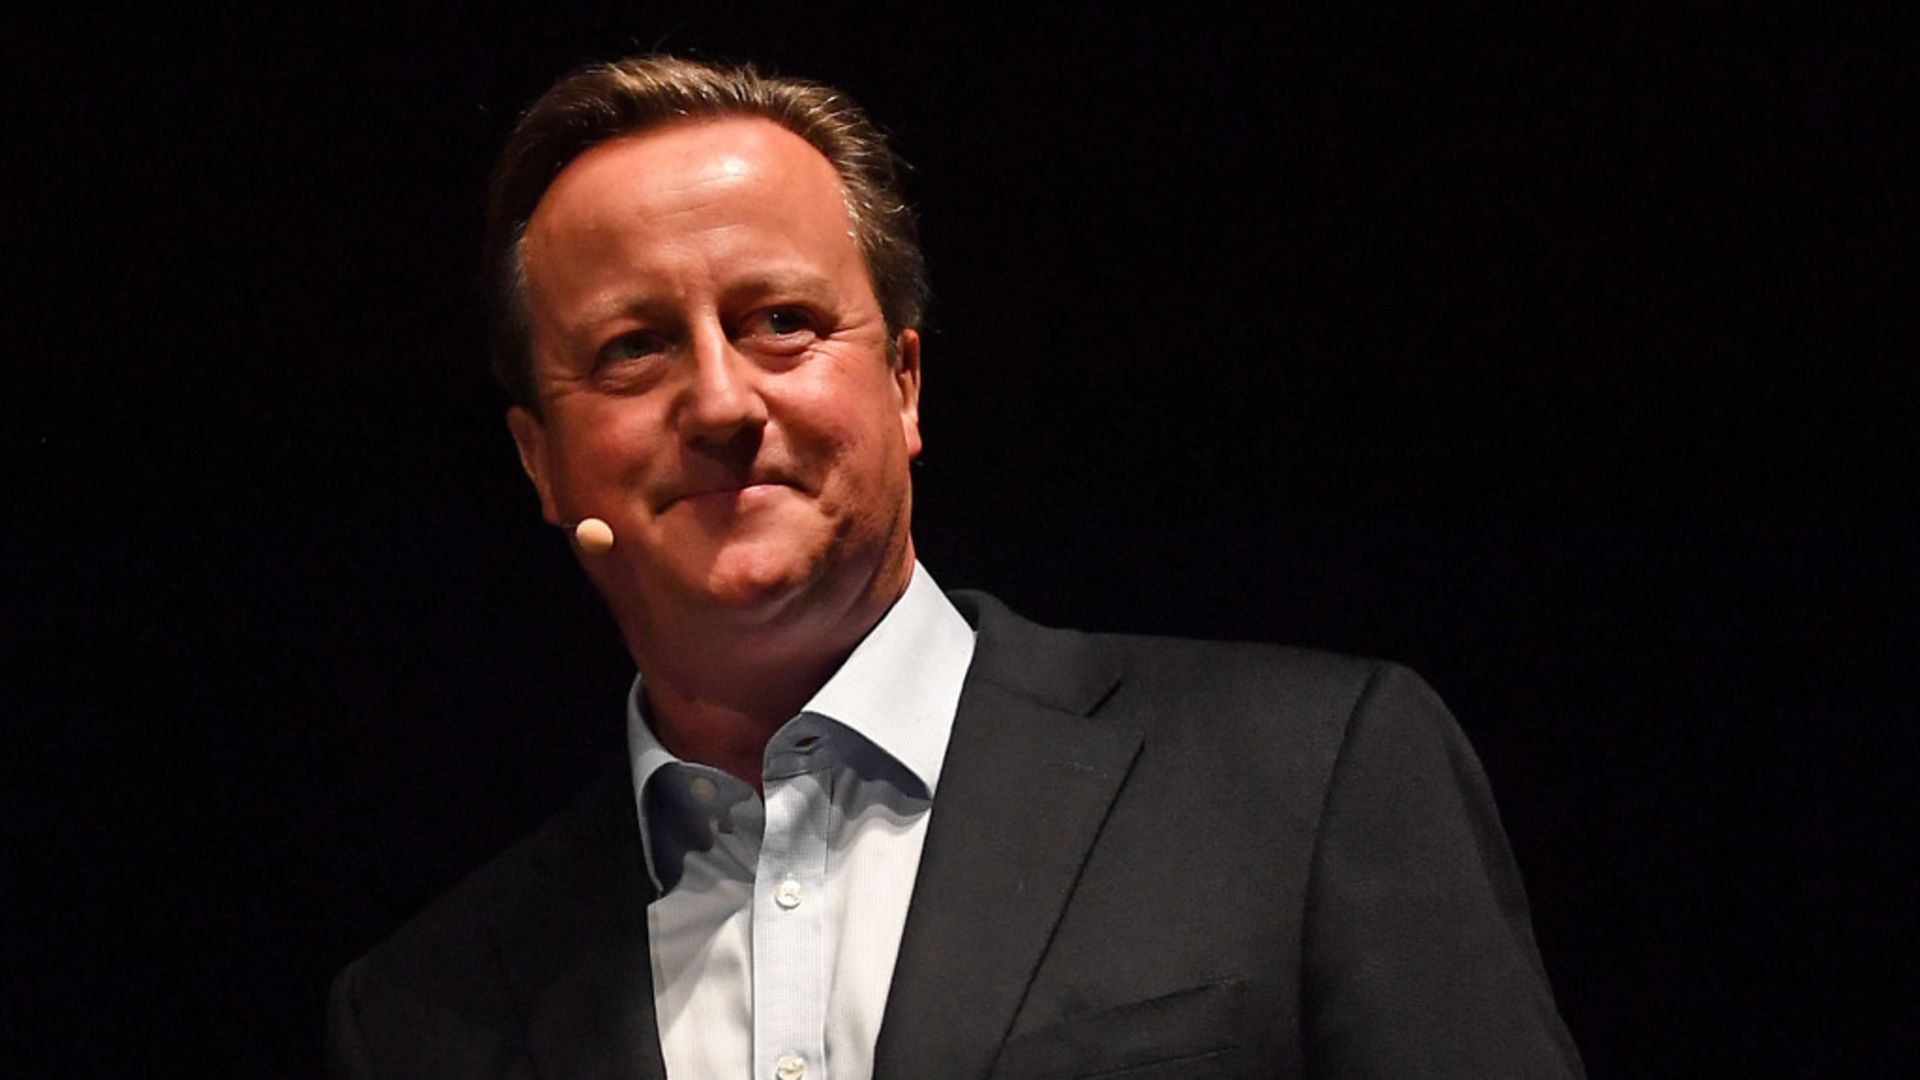 Former prime minister David Cameron - Credit: PA Wire/PA Images